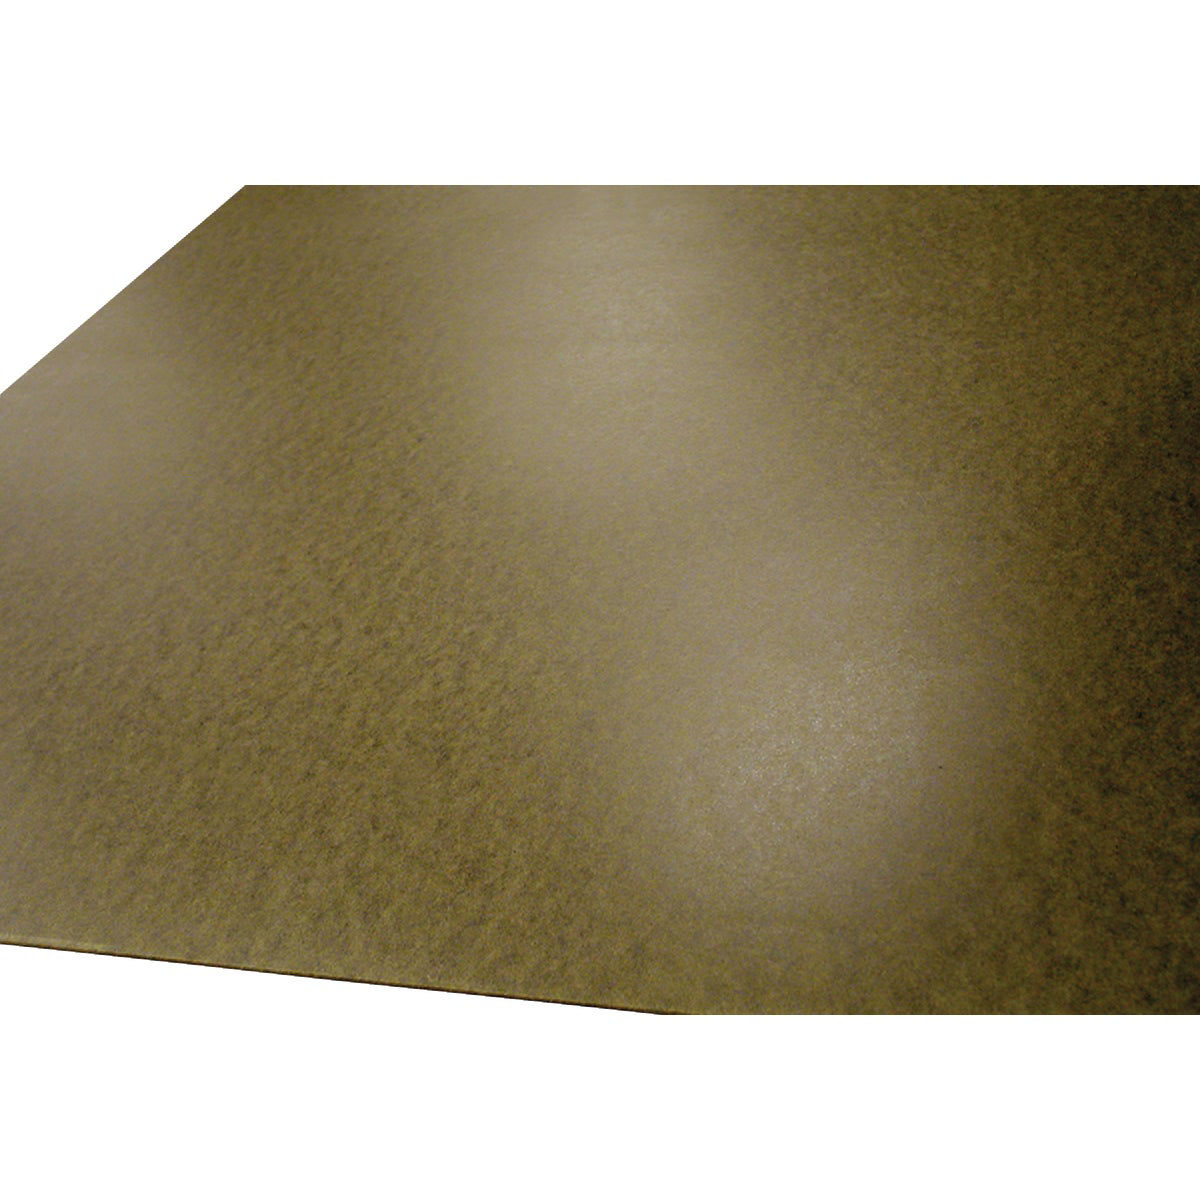 High Tensile Brass Heavy Vehicle Sliding Pad, Packaging Type